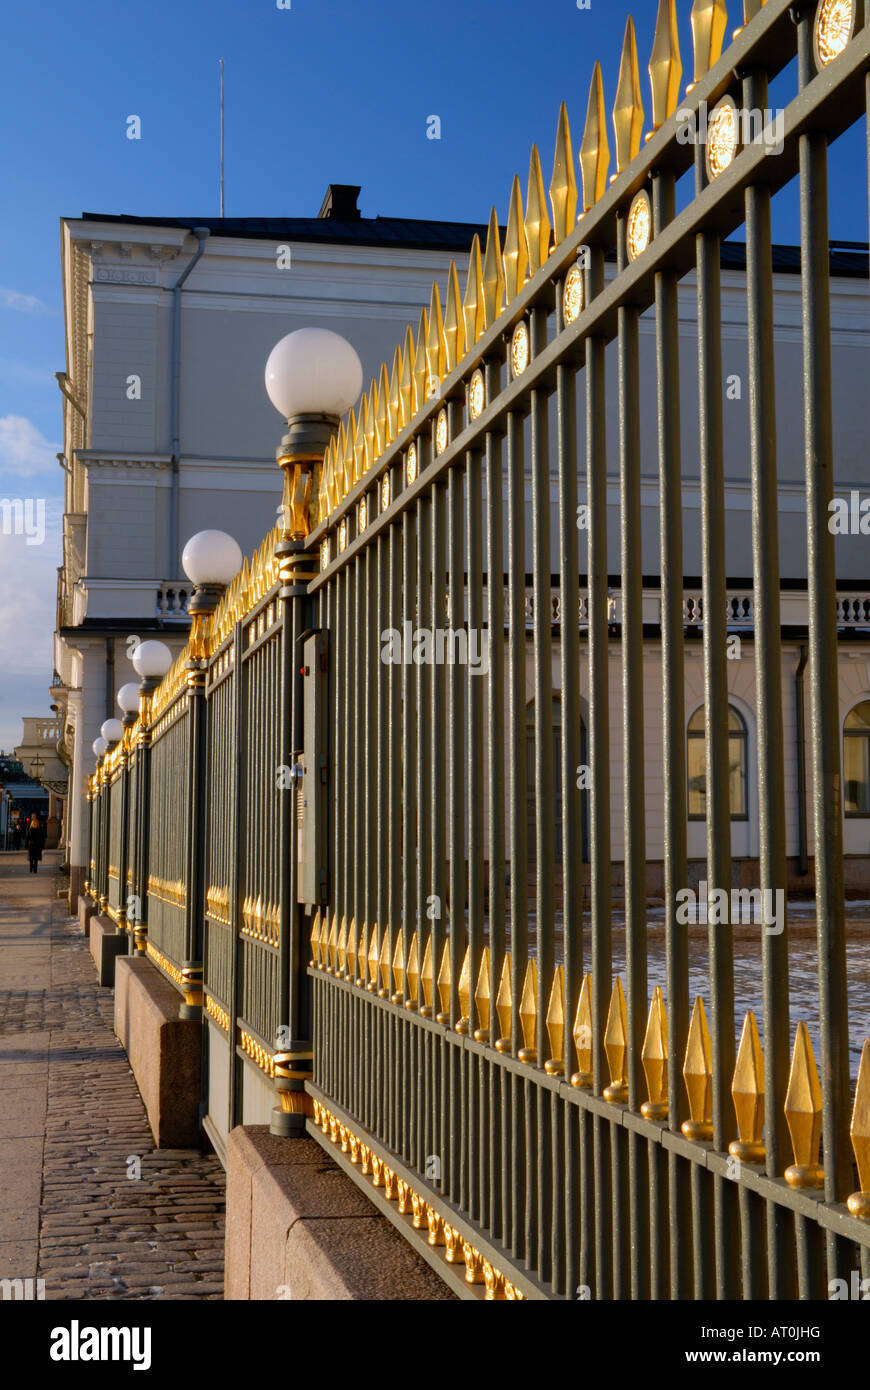 The golden decoratives of the fence in front of the Presidential palace, Helsinki, Finland, Europe. Stock Photo